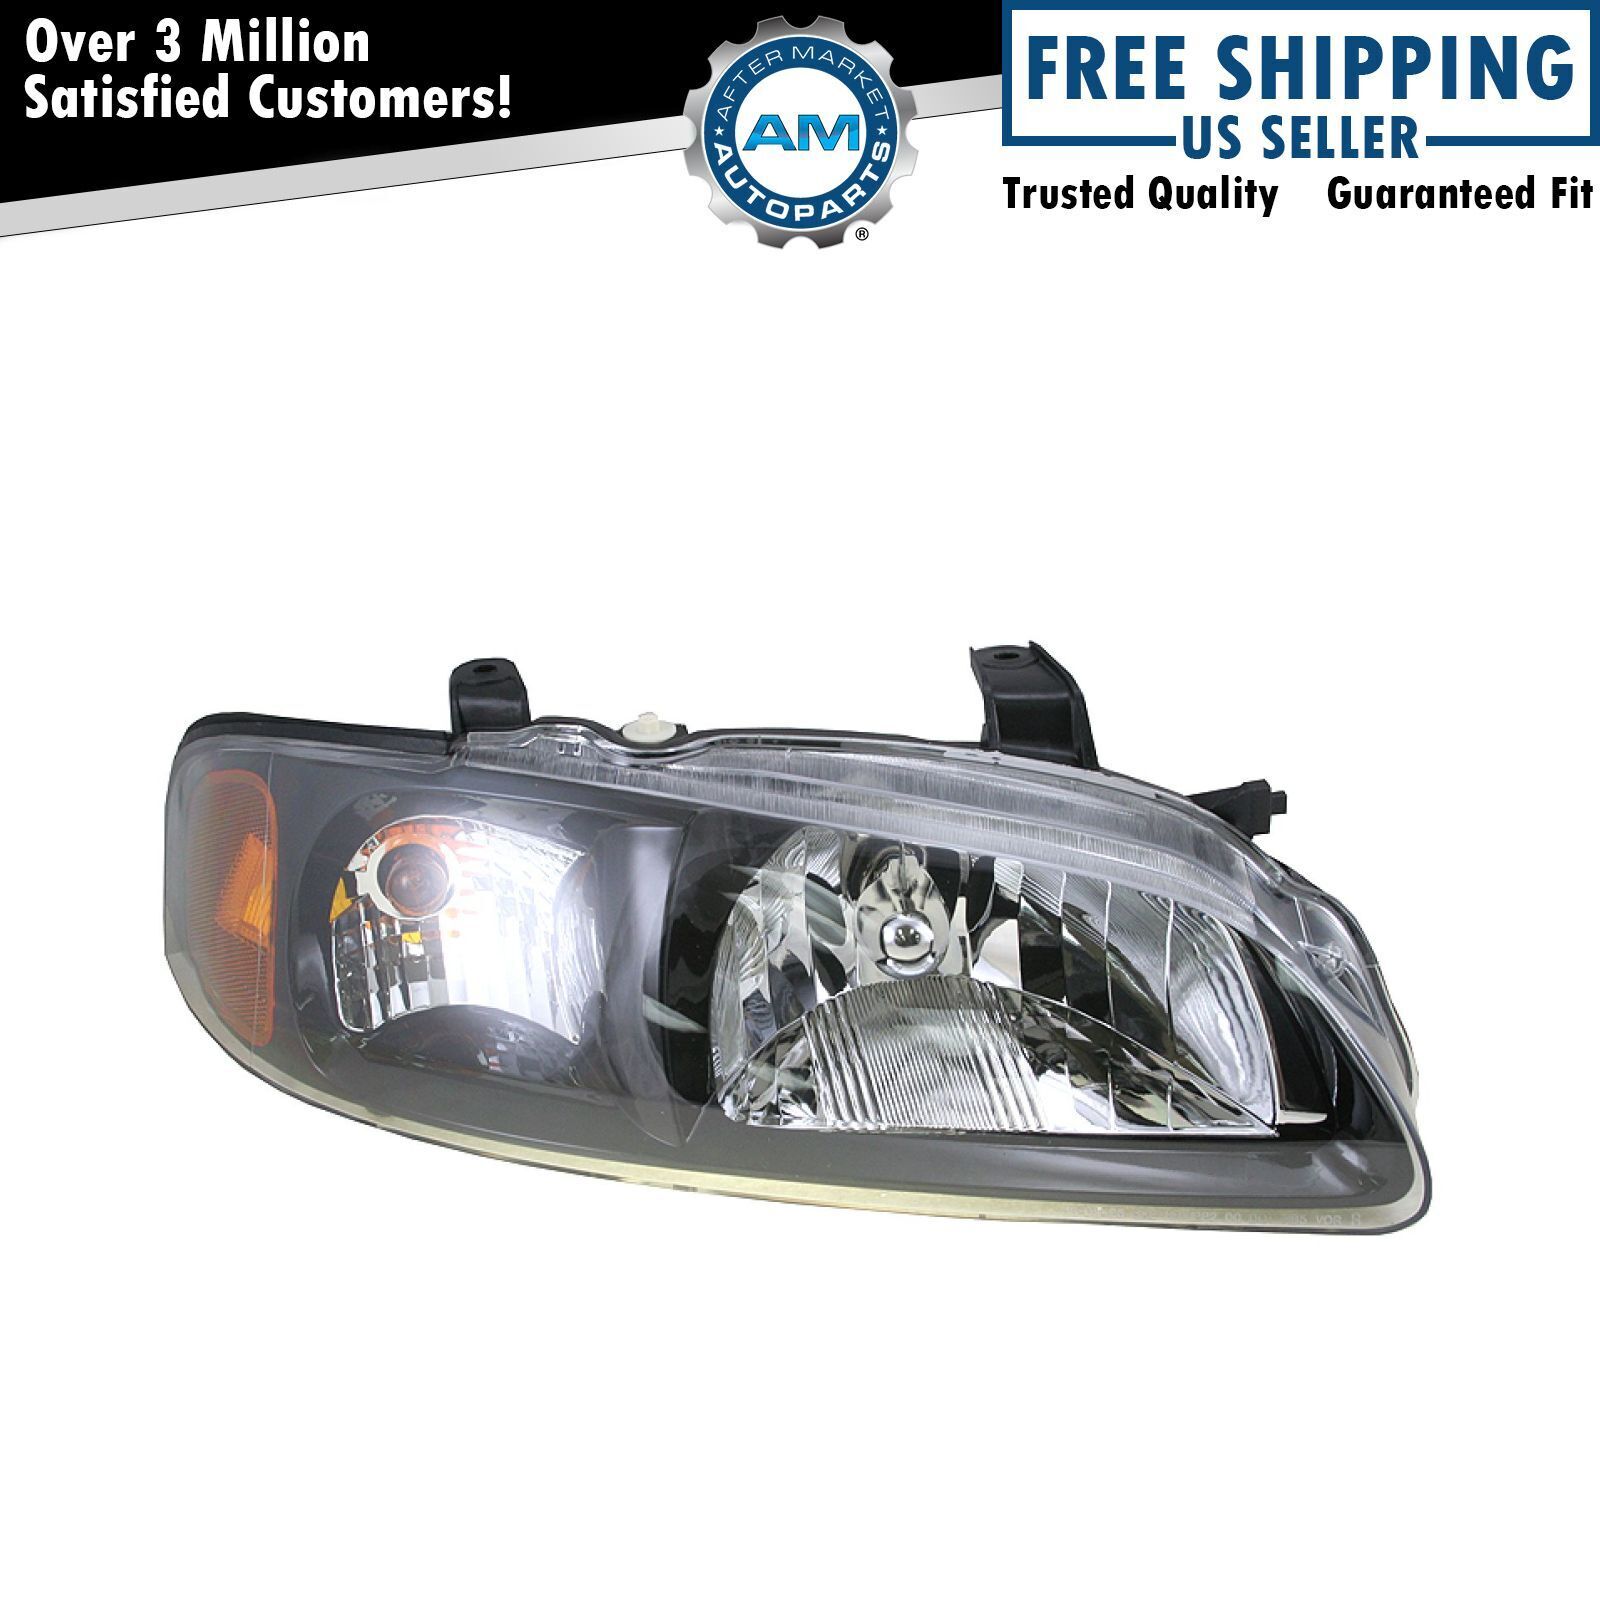 Right Headlight Assembly Passenger Side For 2002-2003 Nissan Sentra NI2503141